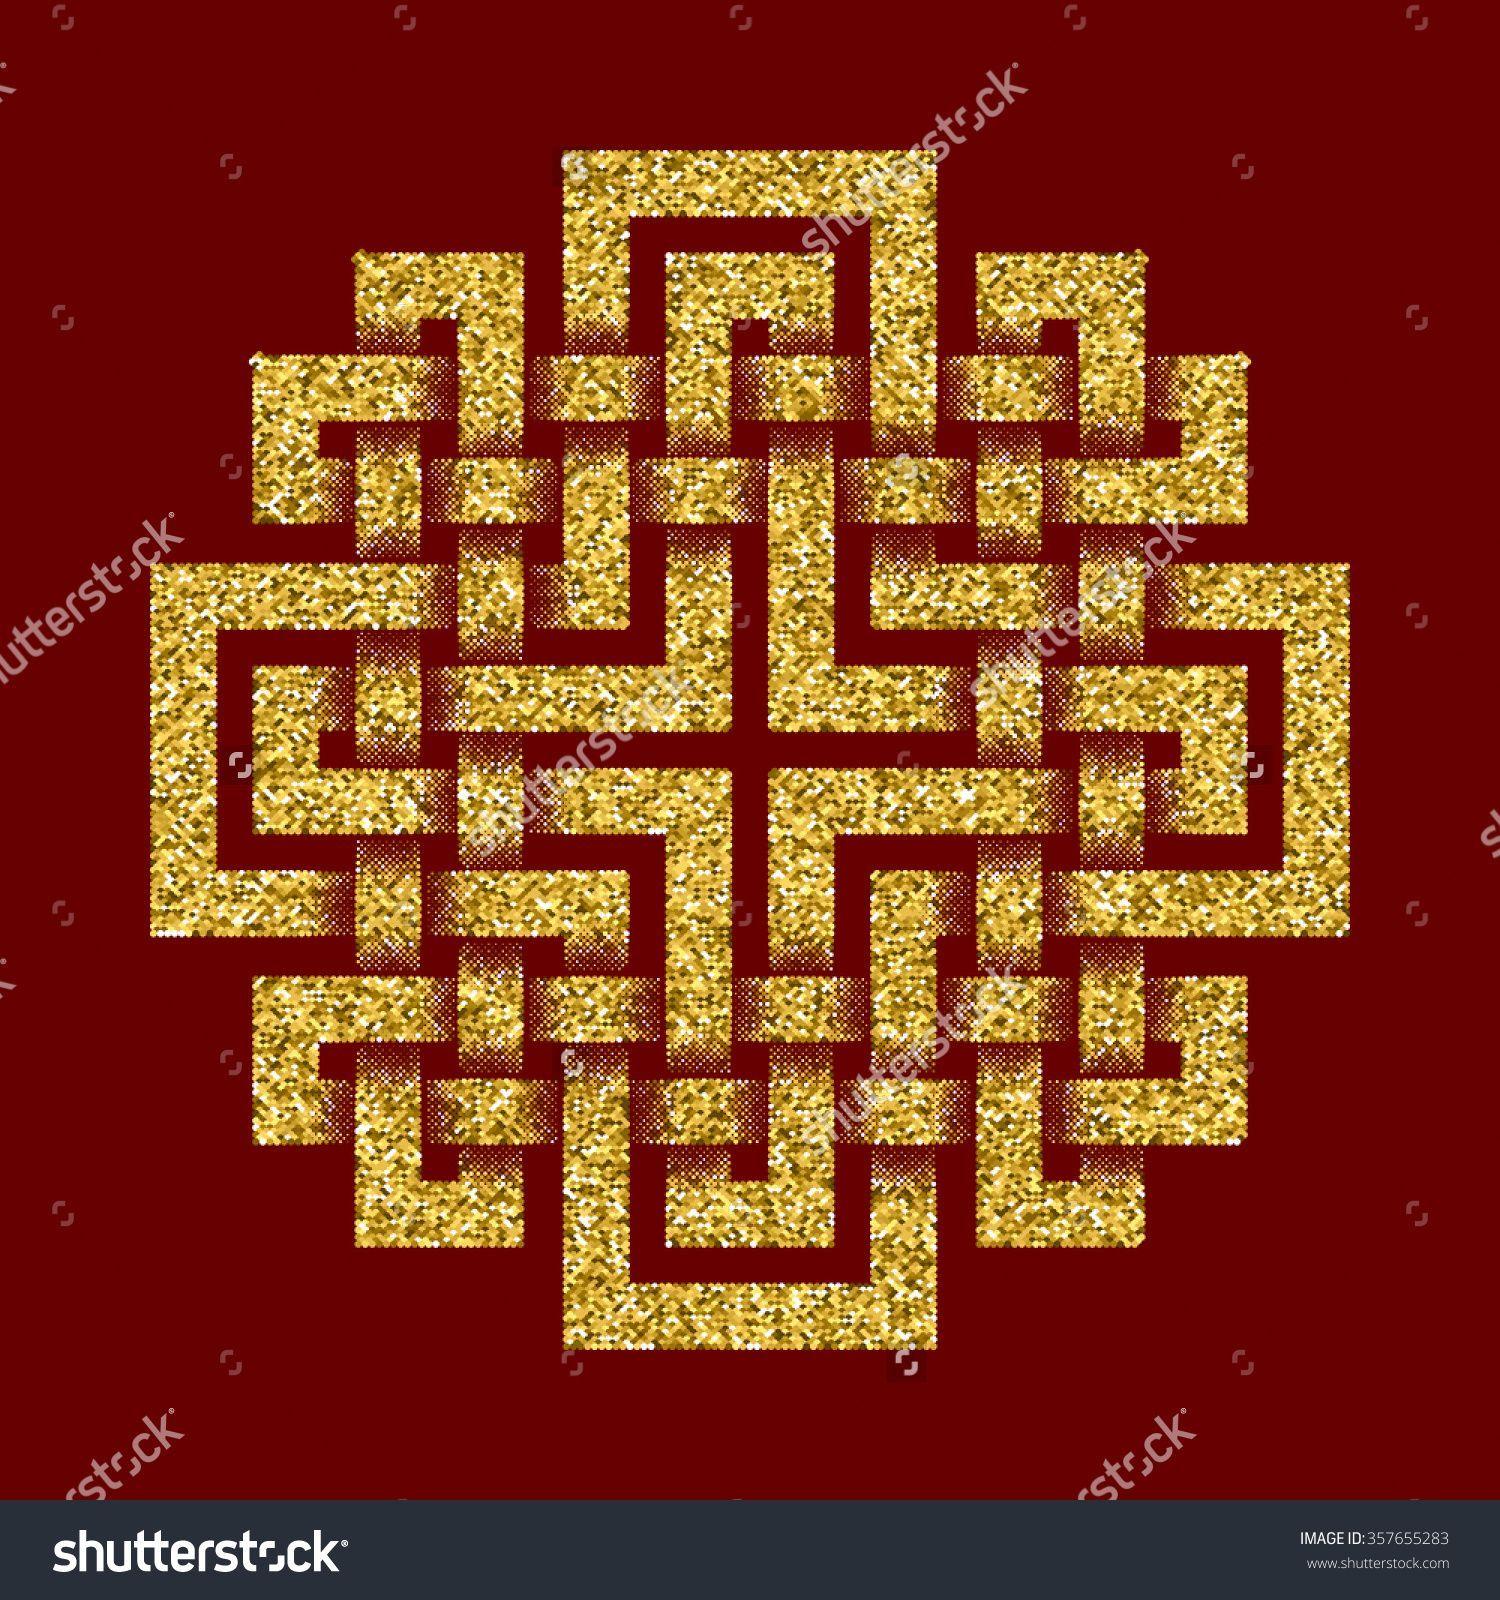 Cross Red Background Logo - Golden glittering #logo template in #Celtic knots style on dark red ...